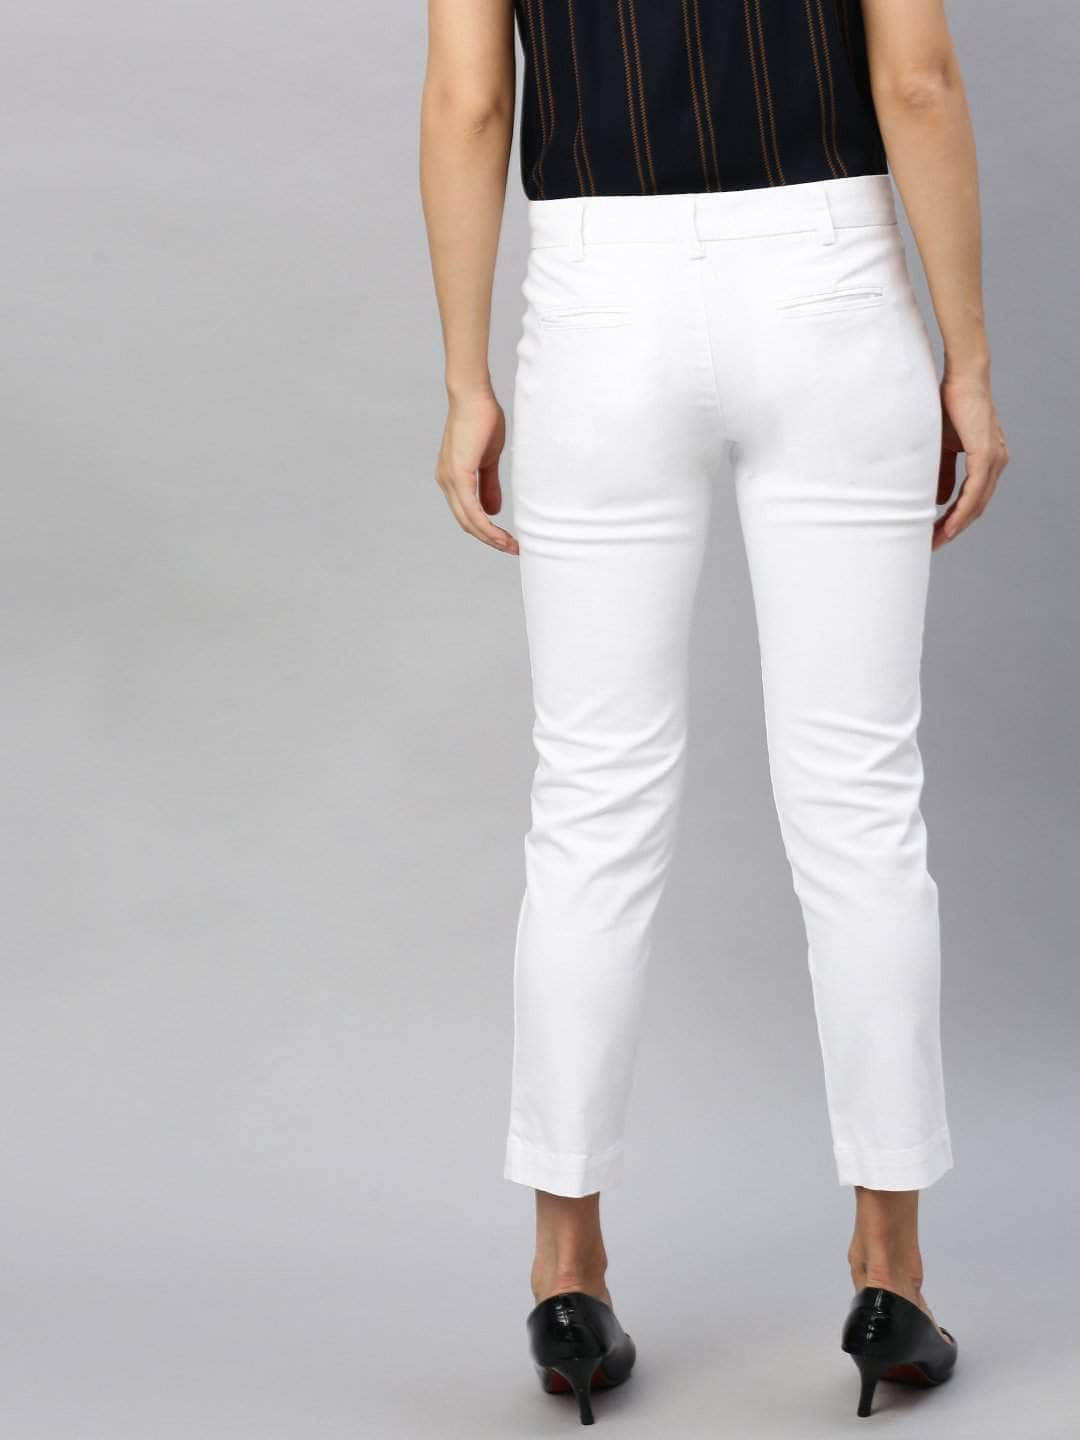 70+ trendy white pants outfit ideas for summer to copy directly! | White  pants outfit summer… | White pants outfit, Wide leg jeans outfit, White  pants outfit spring